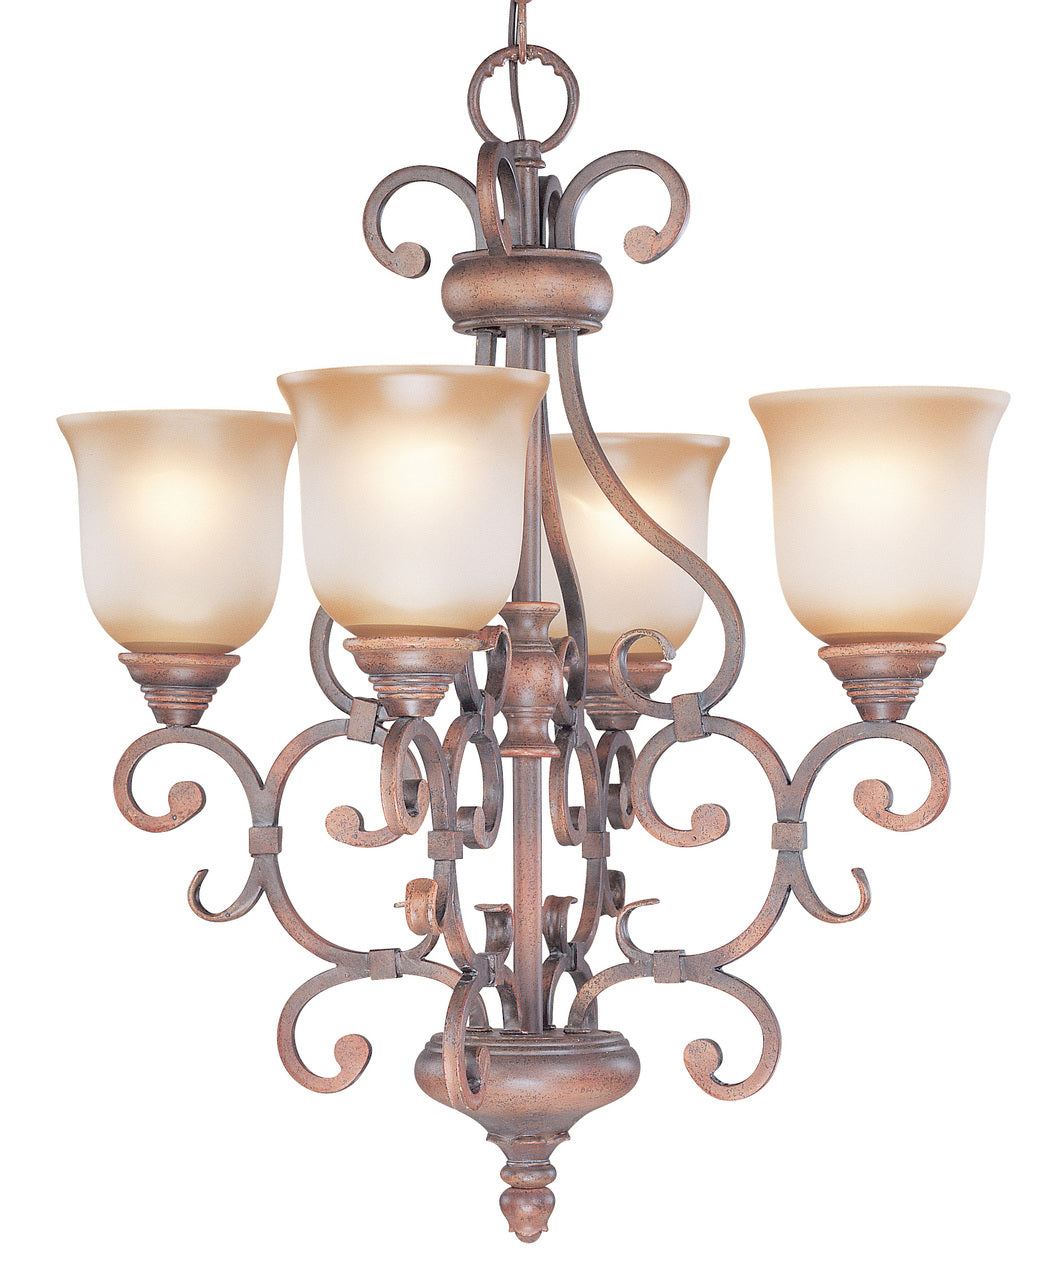 Classic Lighting 92234 HRM Eagle Pointe Wrought Iron Chandelier in Hand-Rubbed Mahogany